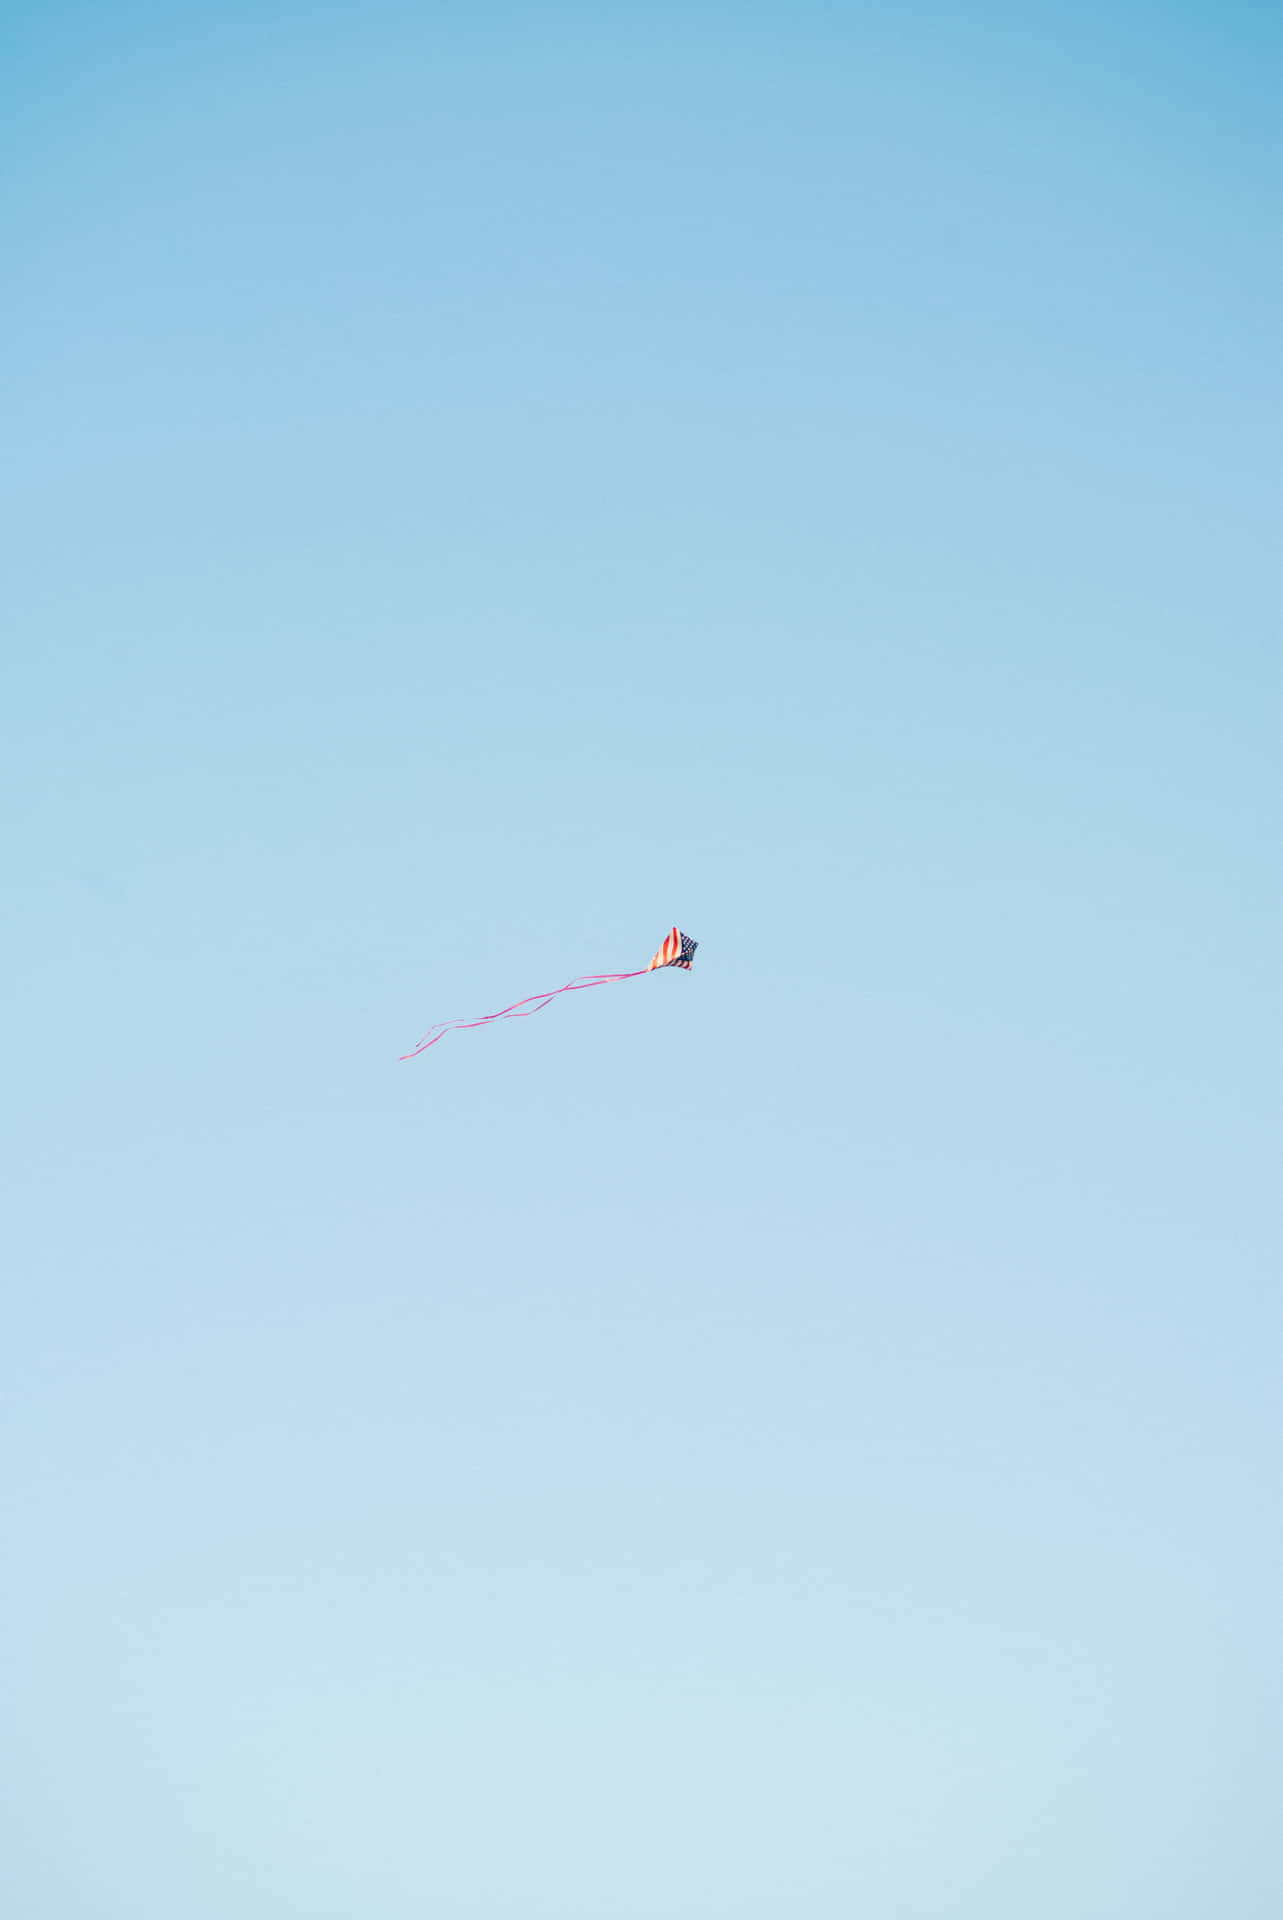 A Person Flying A Kite In The Sky